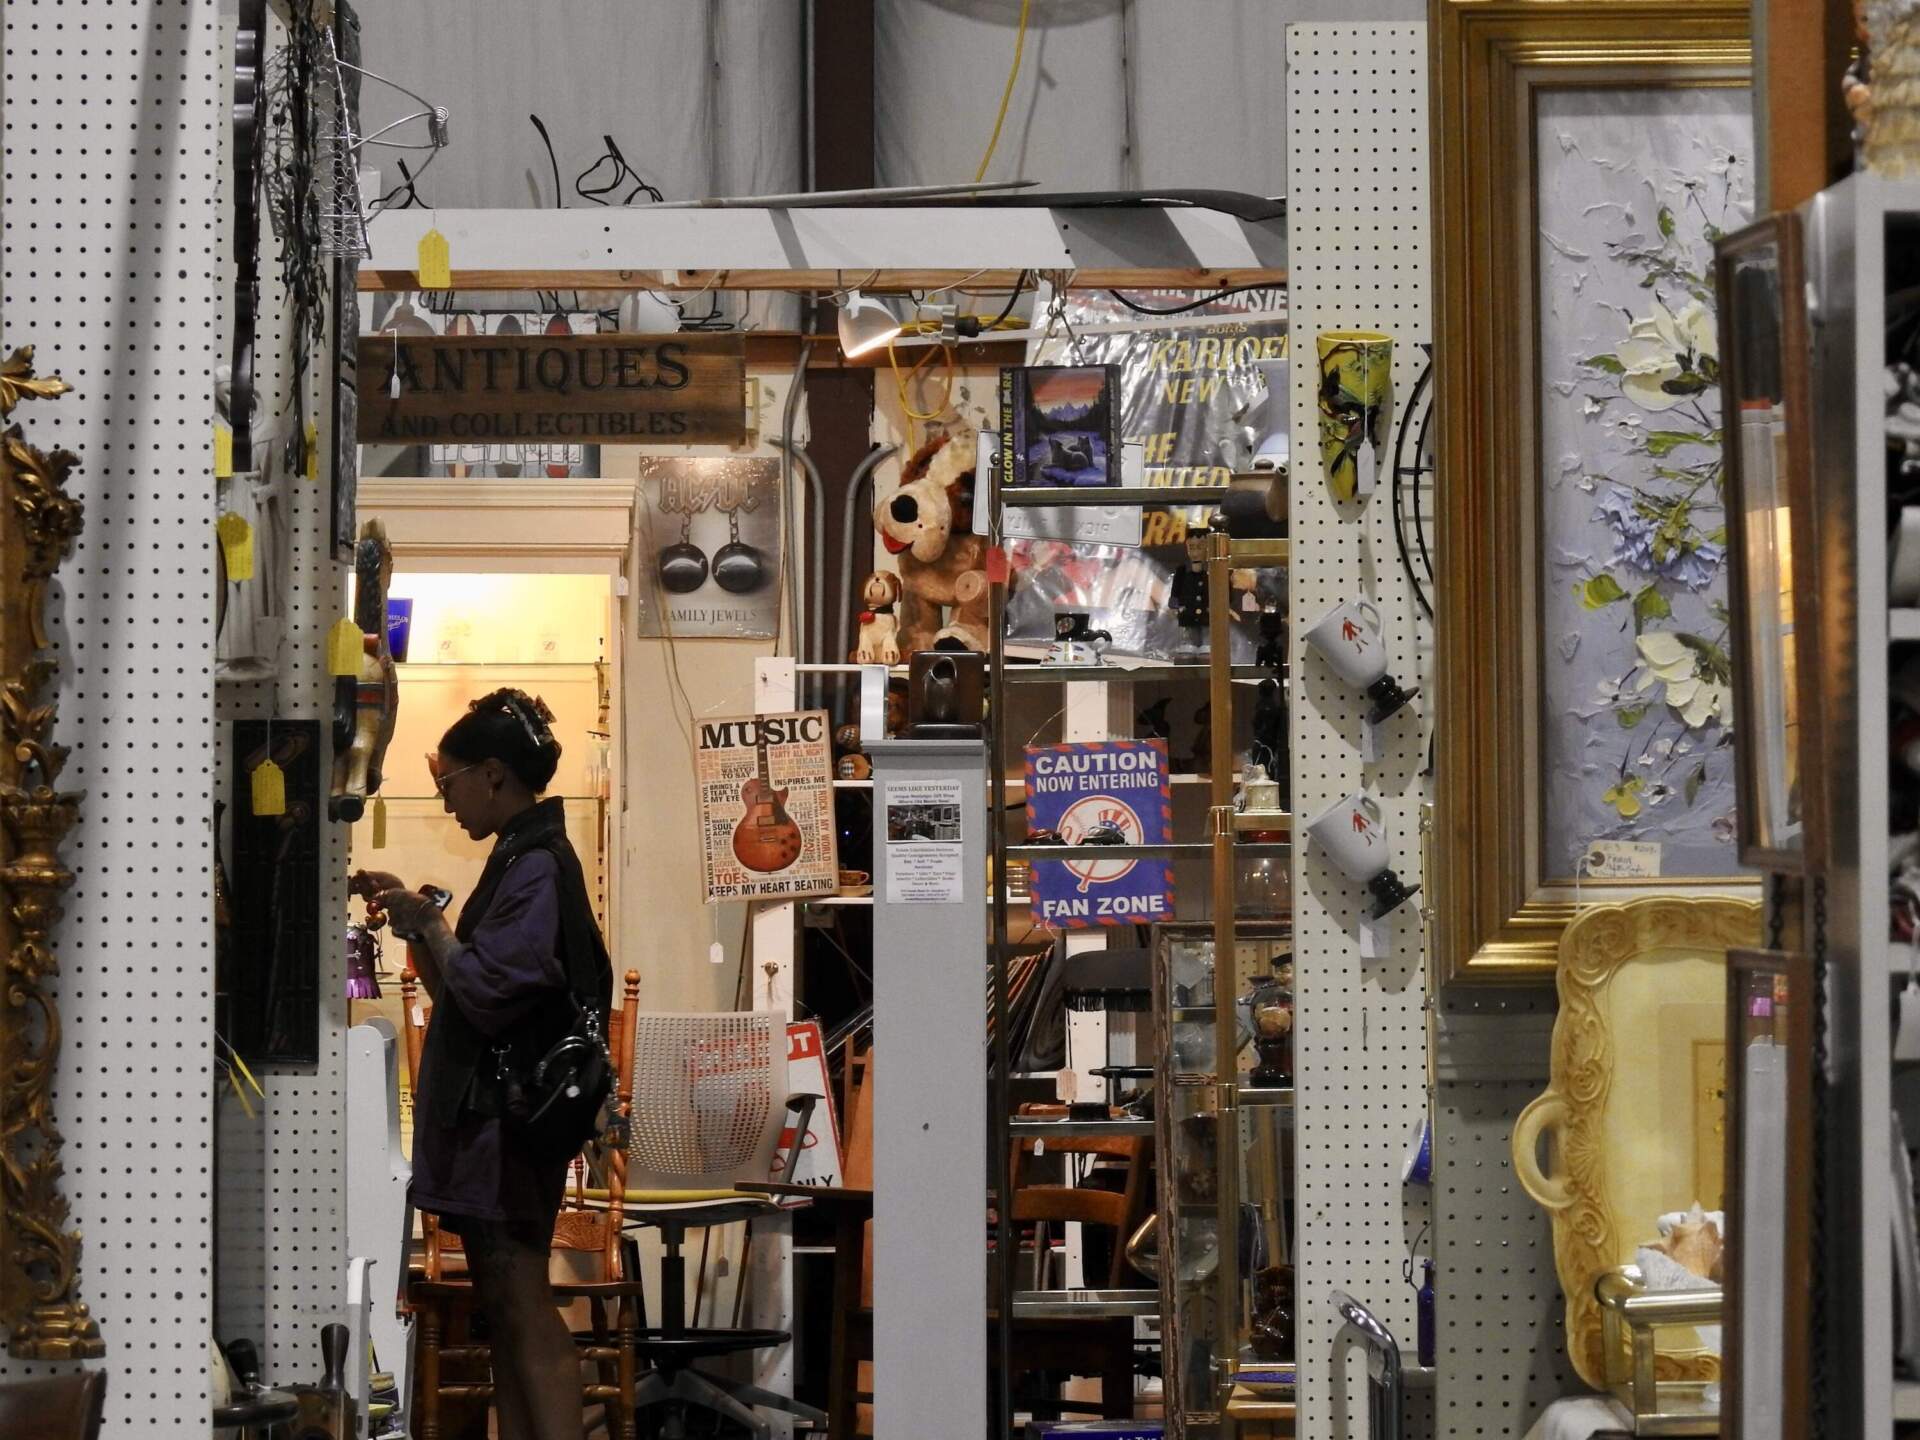 A shopper peruses the antiques collections at the Stratford Antique Center in Stratford, Conn. (Eda Uzunlar/WSHU)